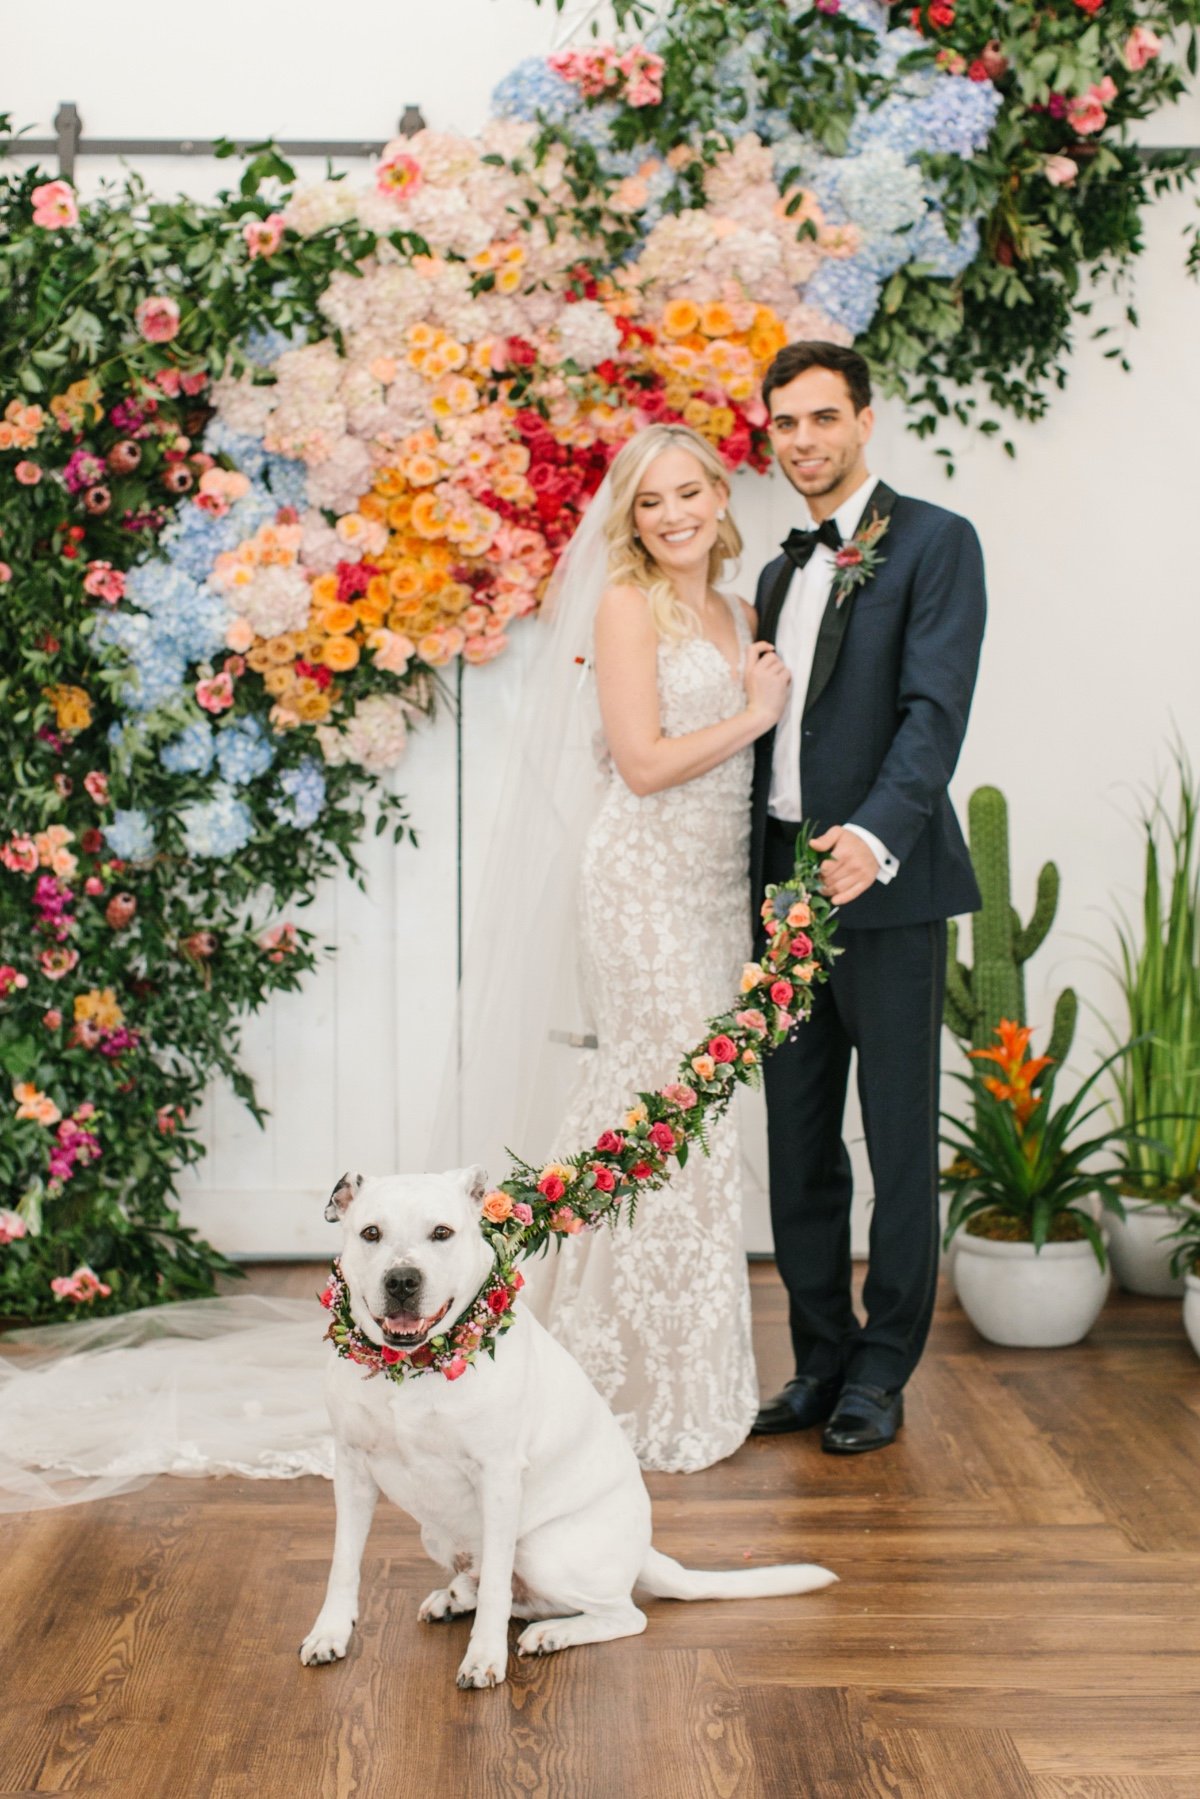 How to incorporate your dog into your wedding